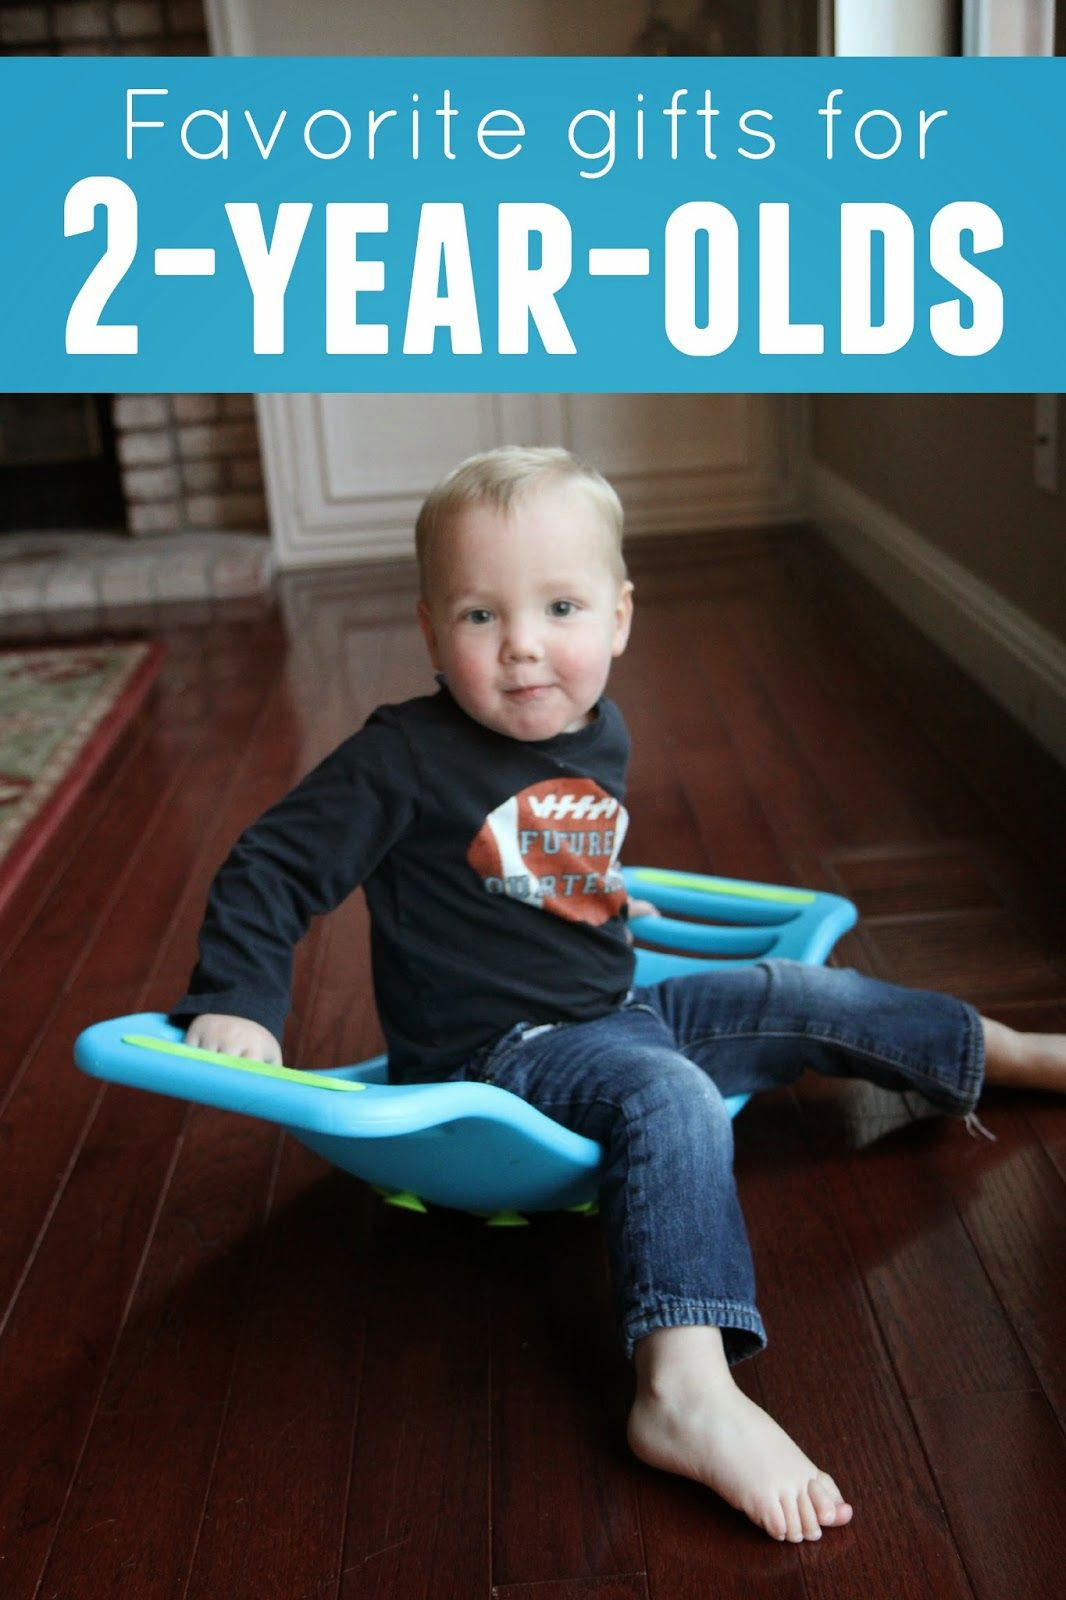 Gift Ideas For Toddler Boys
 Favorite Gifts for 2 Year Olds